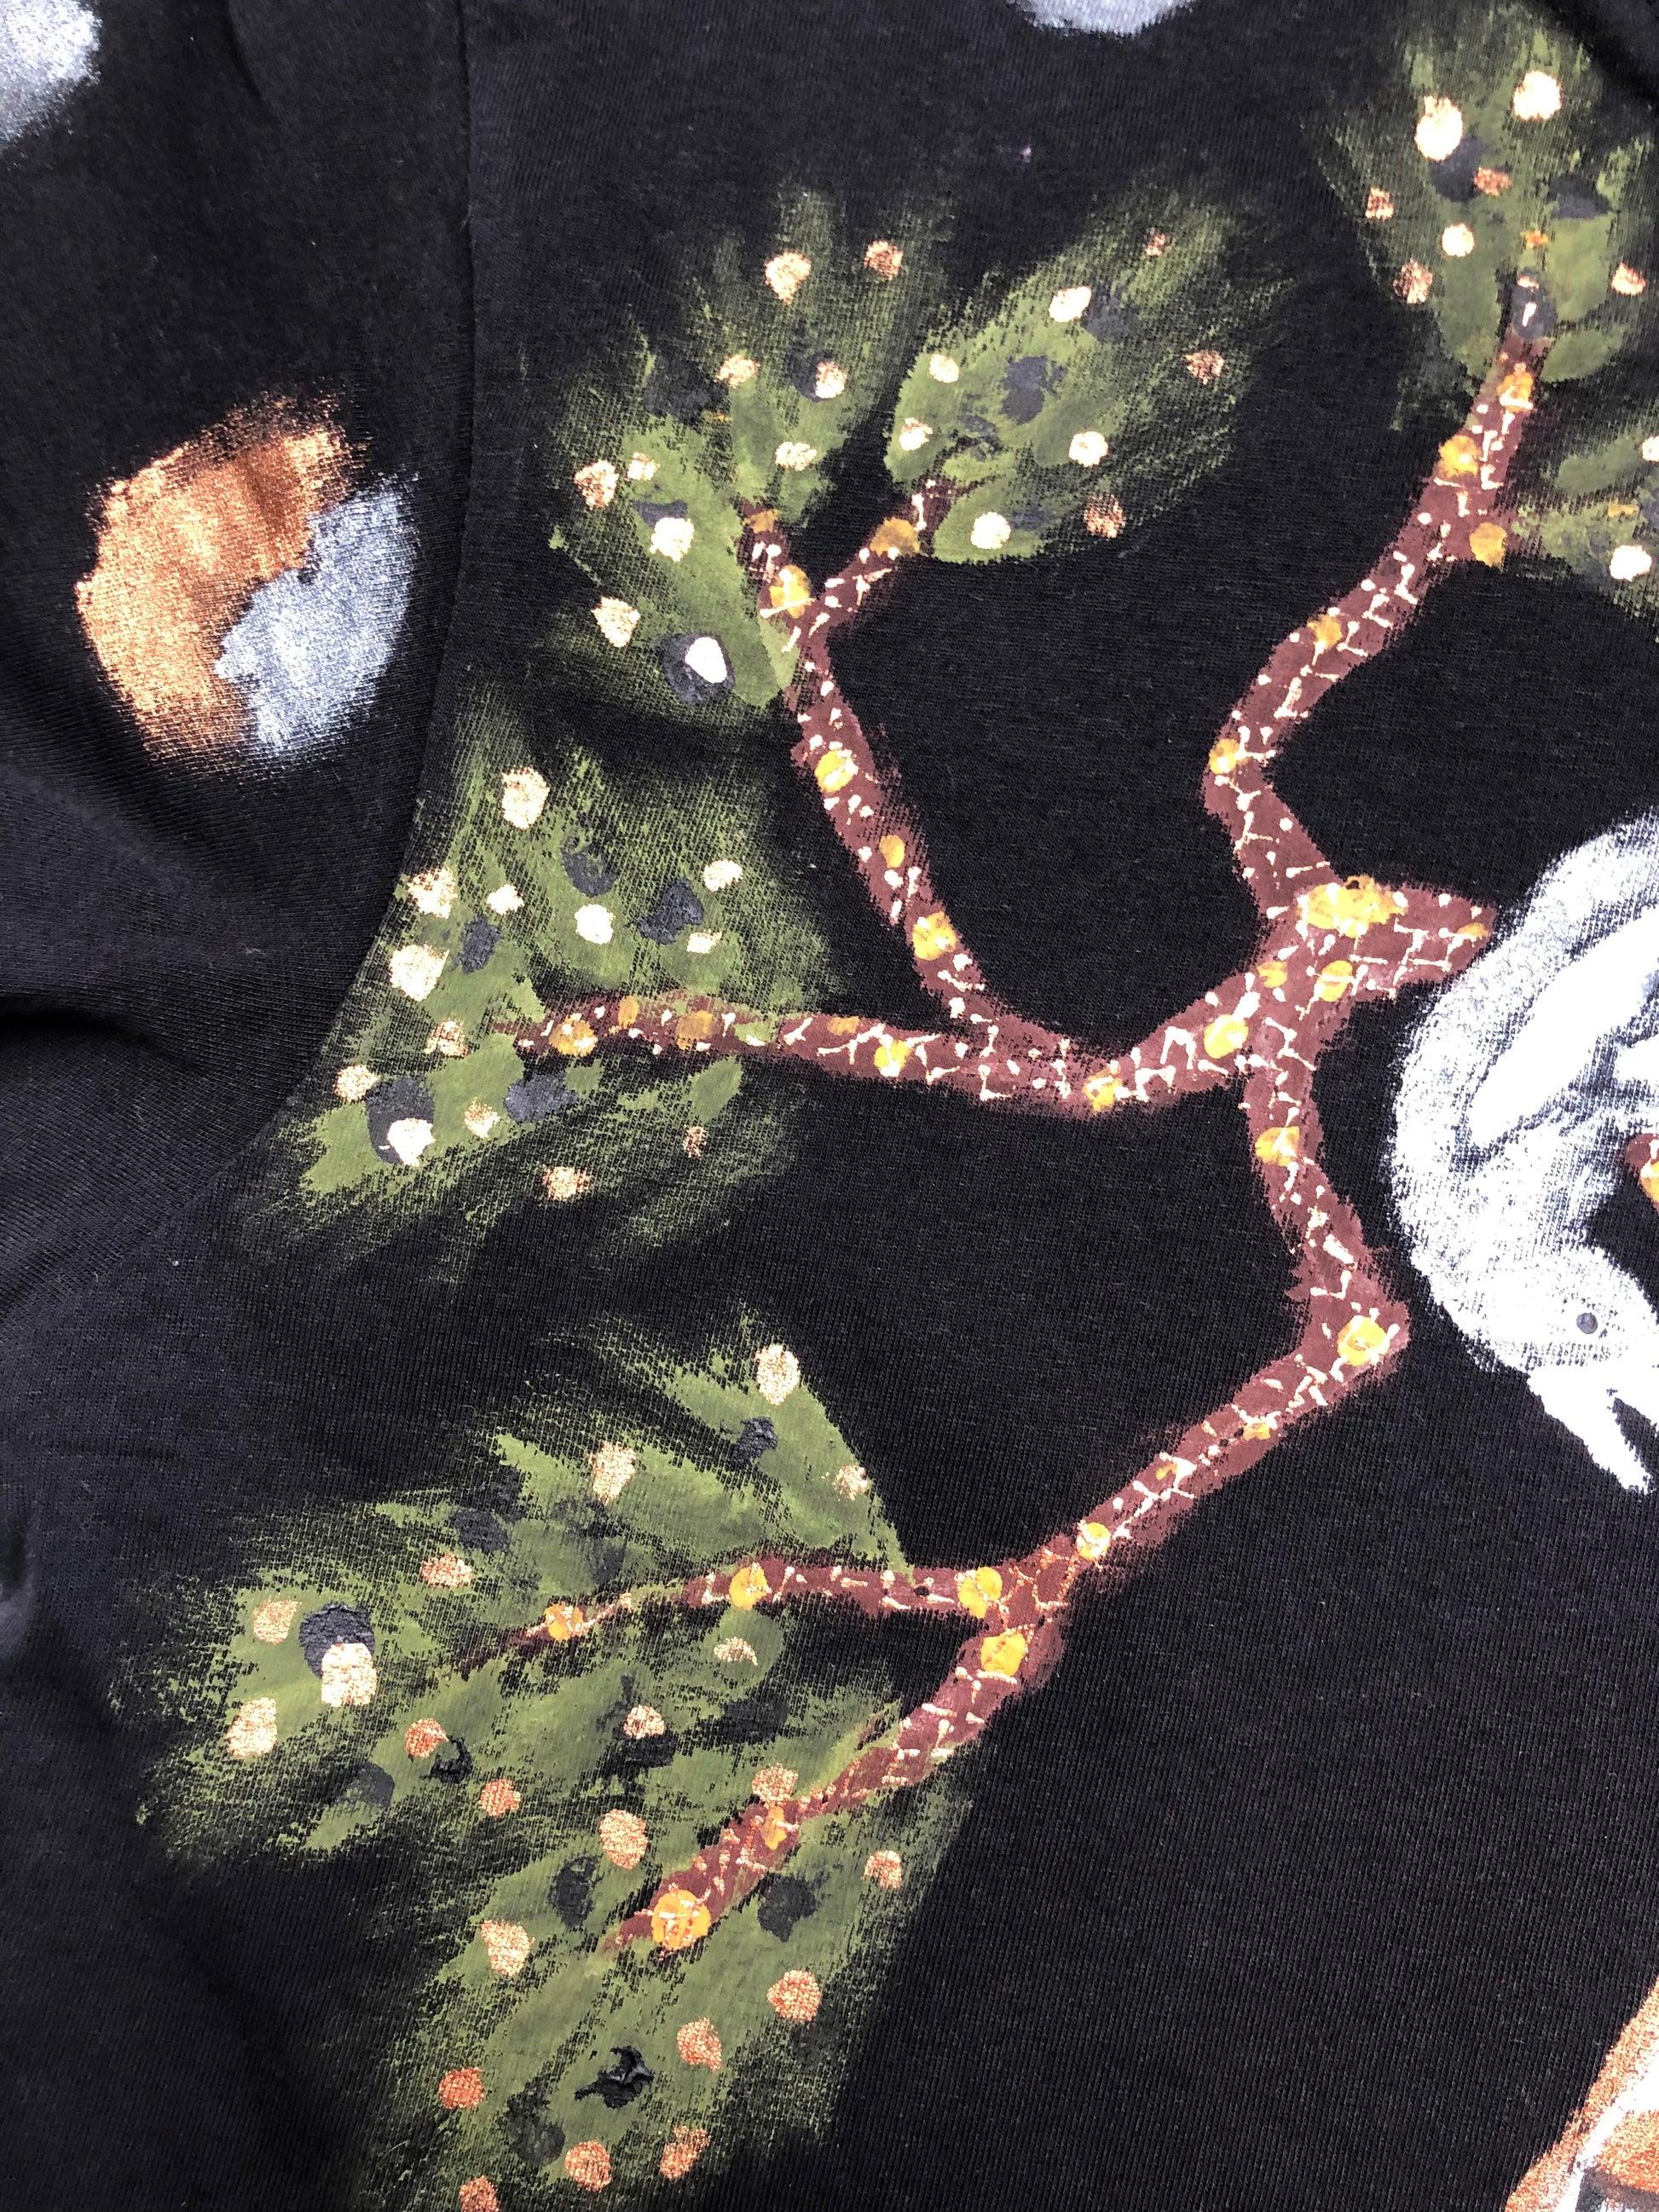 Details of an exquisite branch design with foliage on a t-shirt